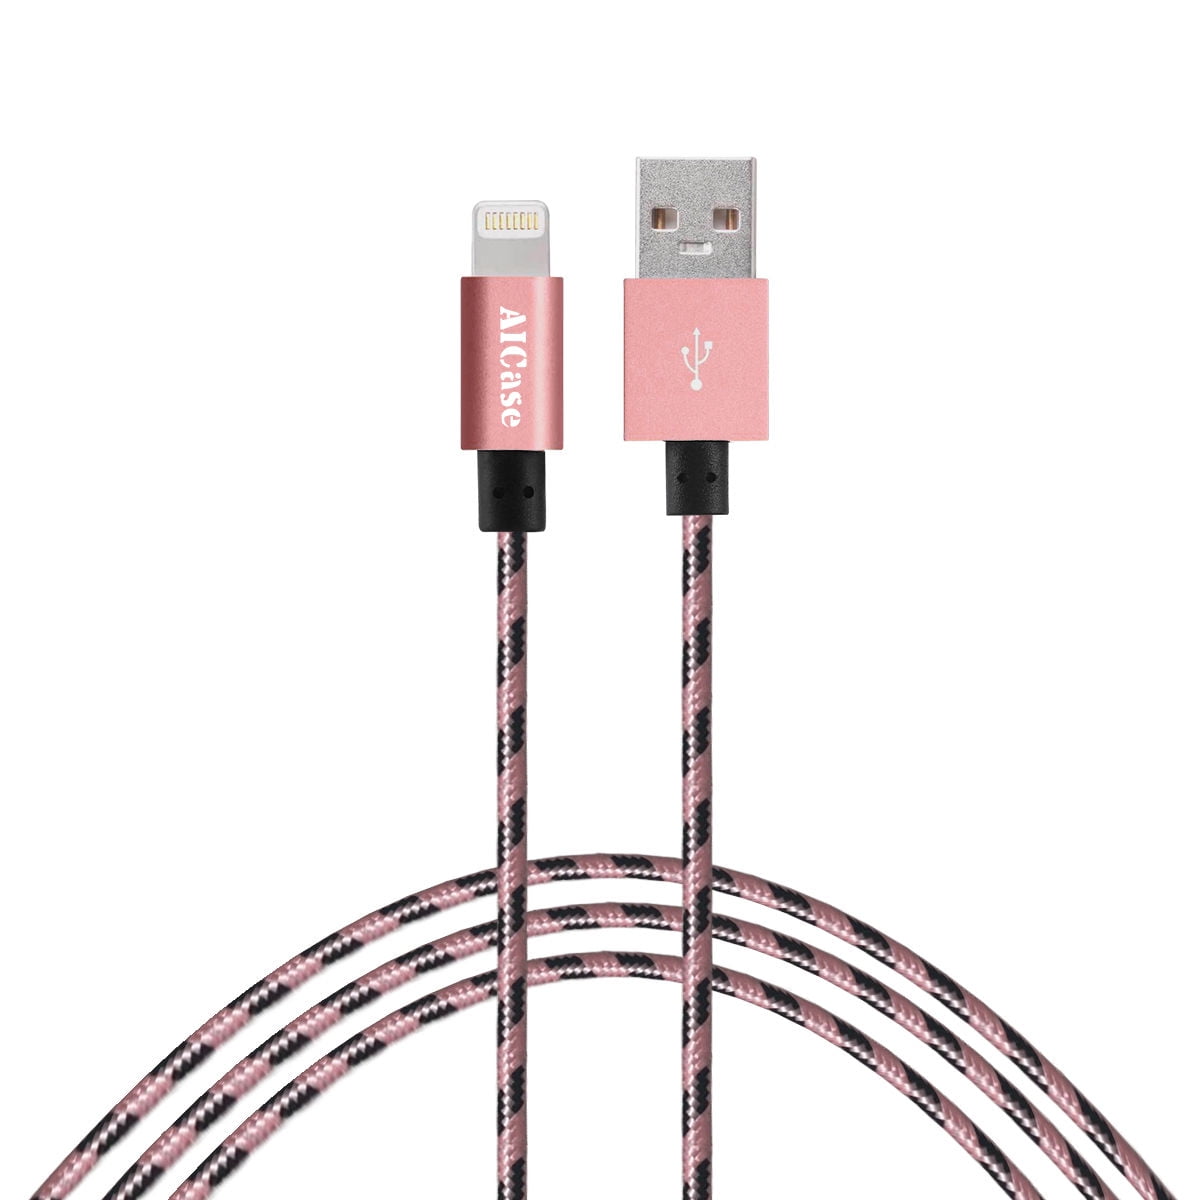 iphone 4s charger cord walmart